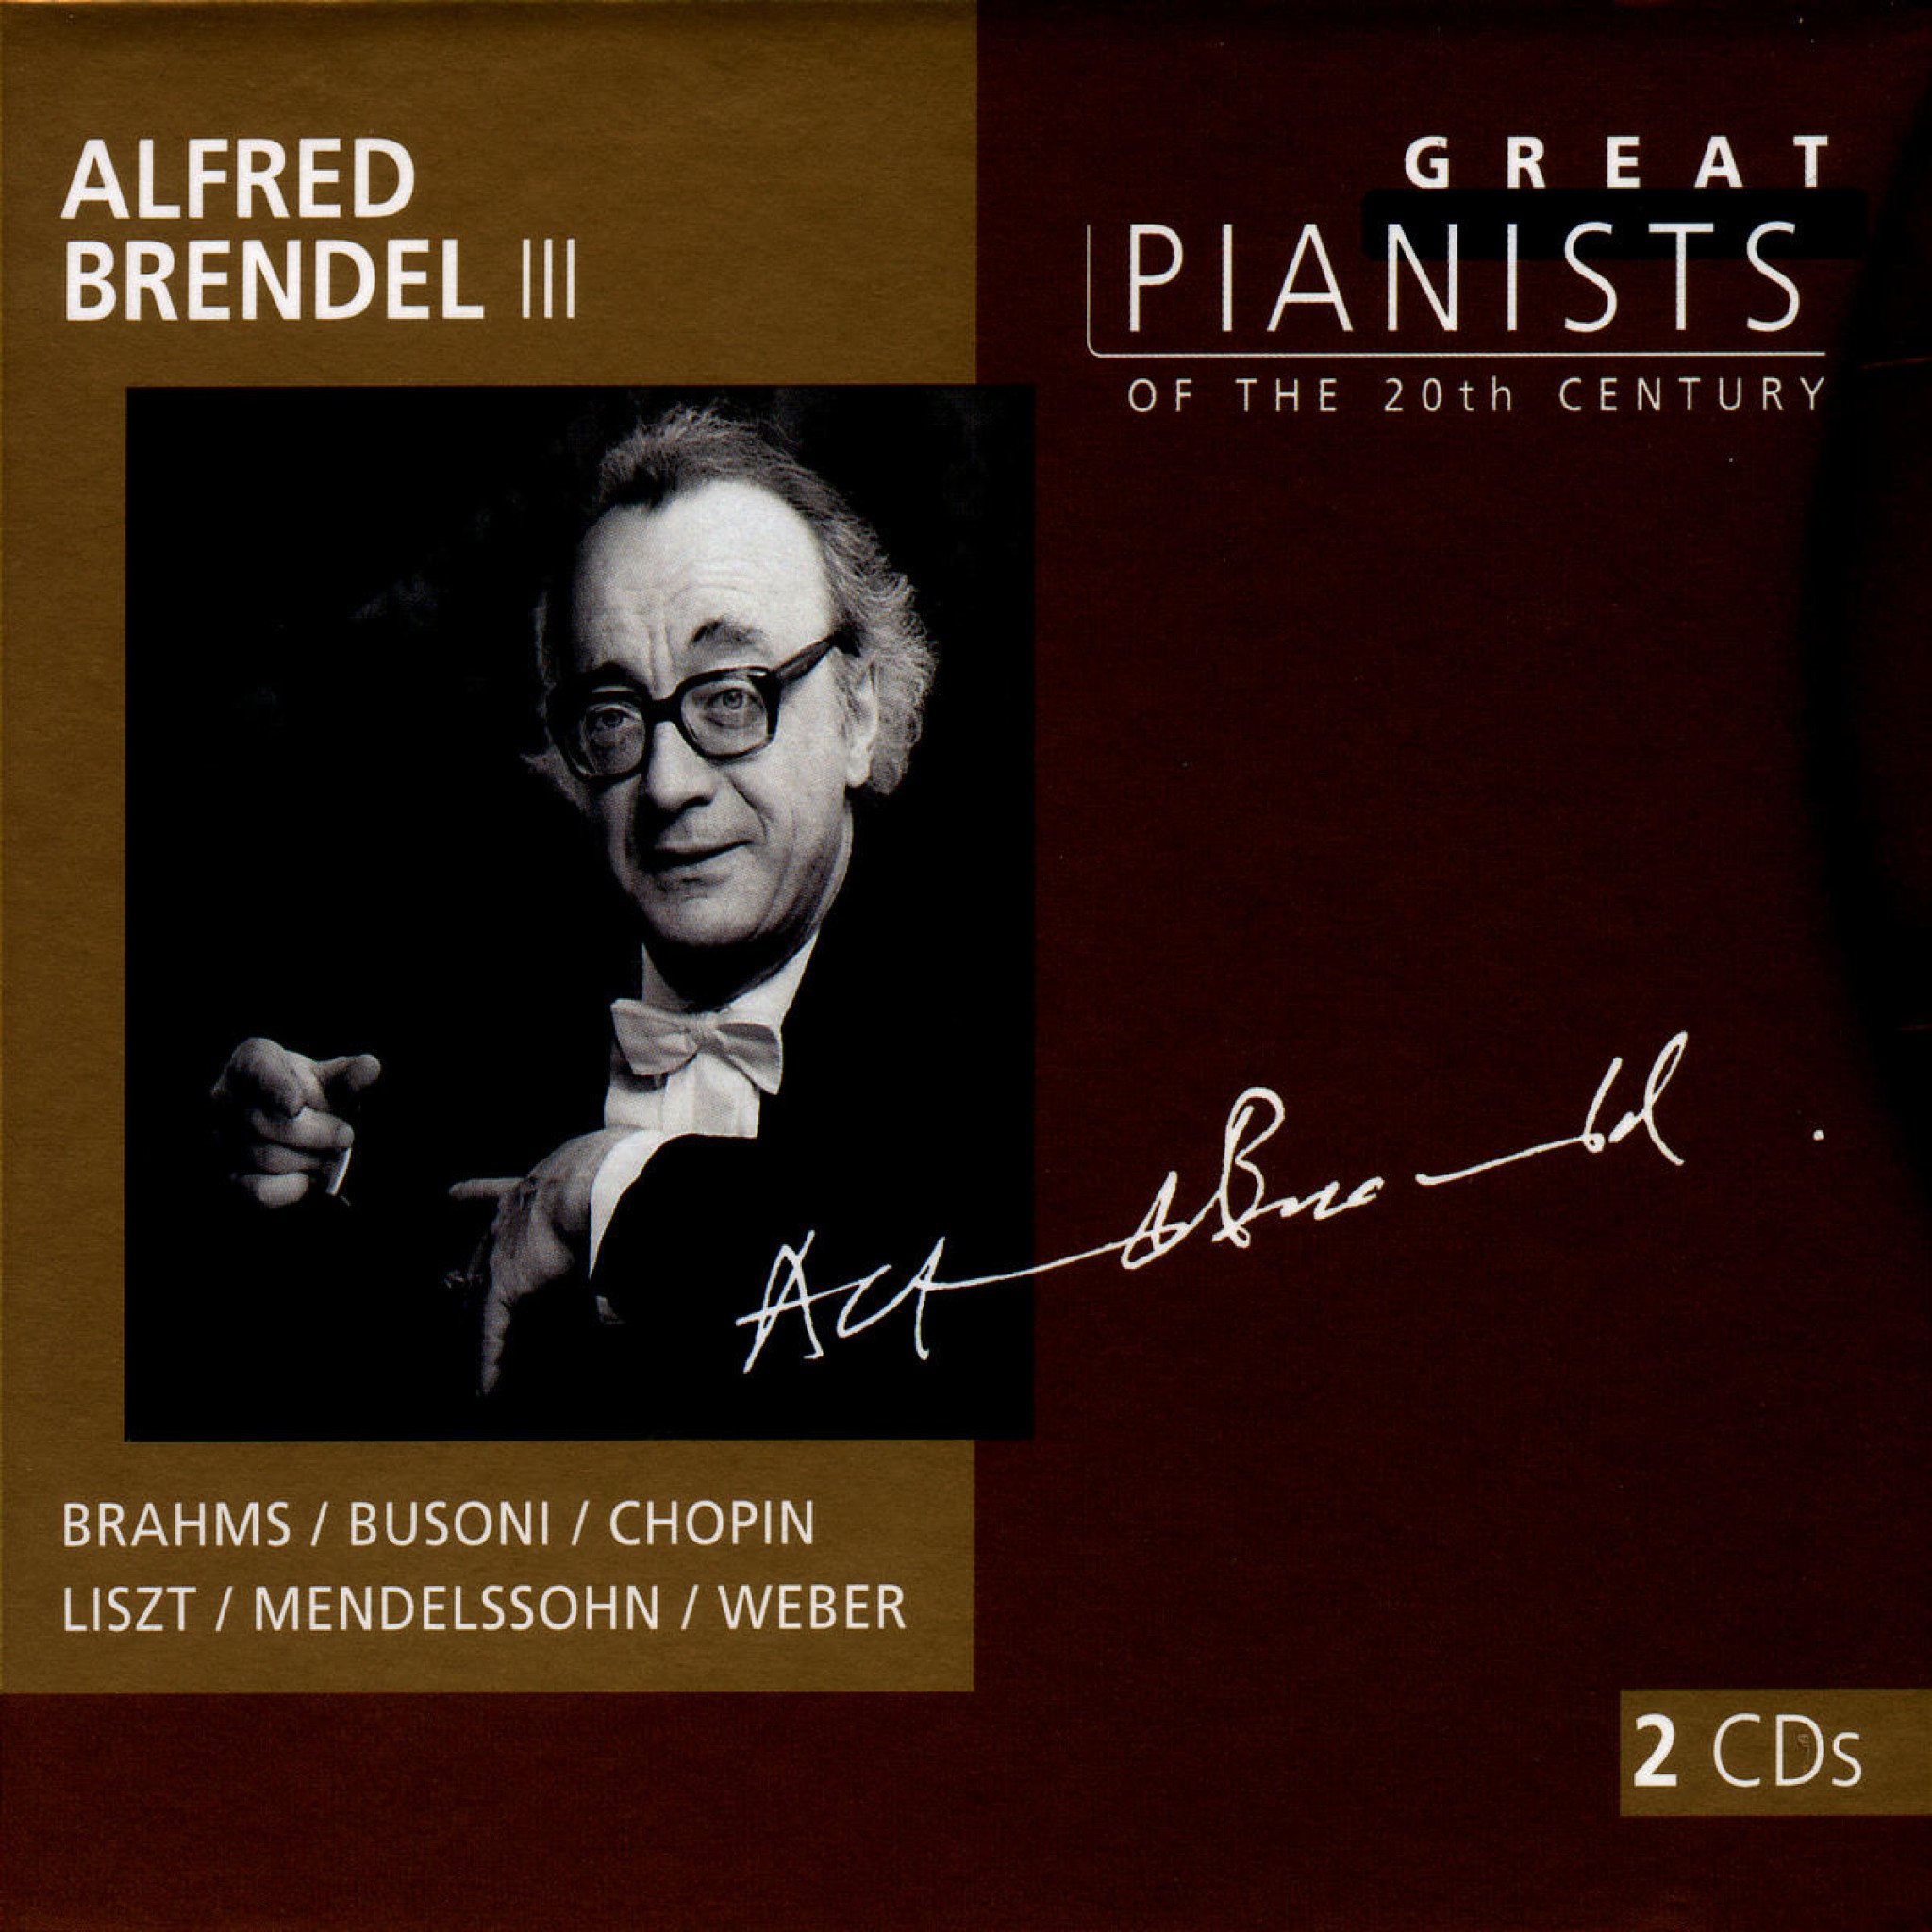 ALFRED BRENDEL III (GREAT PIANISTS OF THE 20TH CENTURY VOL.14)